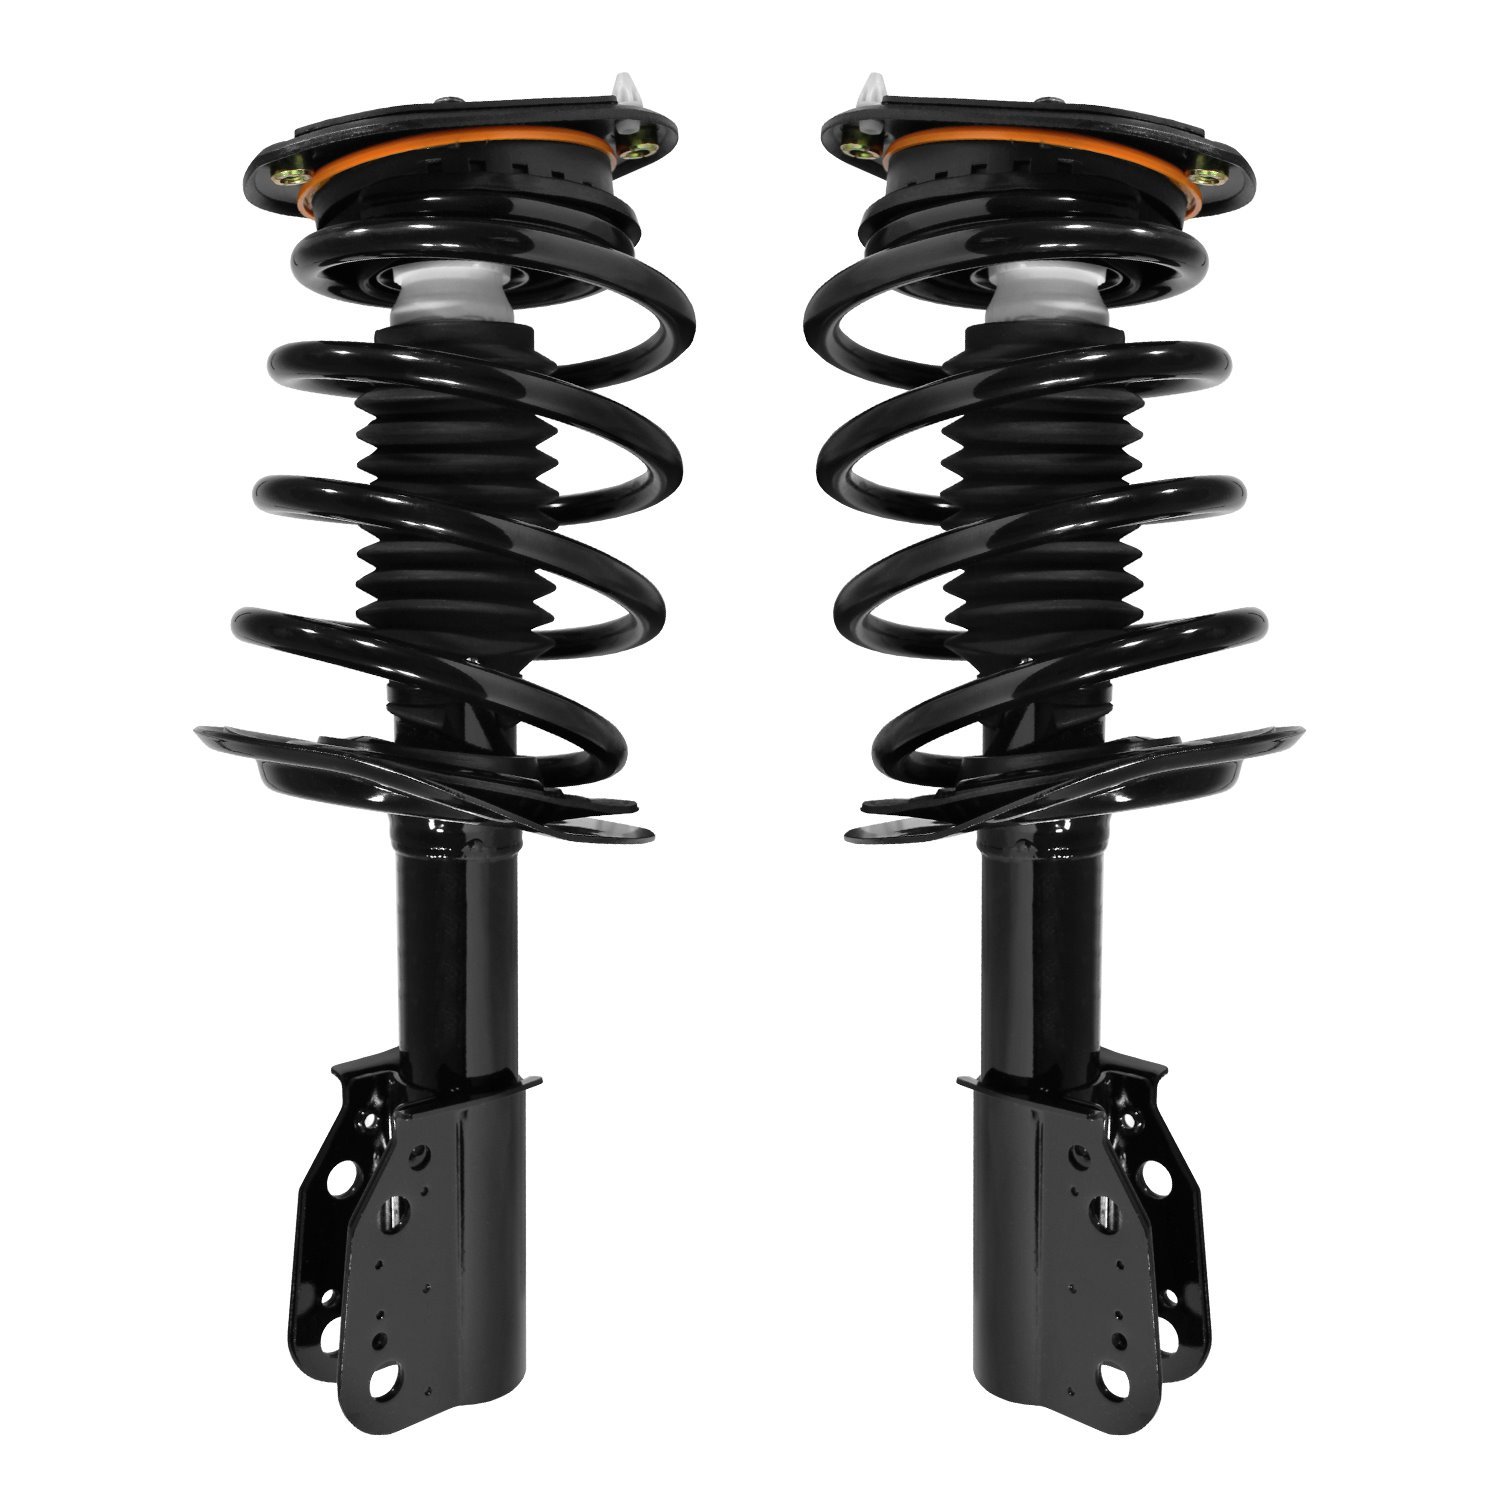 2-11700-001 Suspension Strut & Coil Spring Assembly Set Fits Select Buick Lucerne, Cadillac DTS